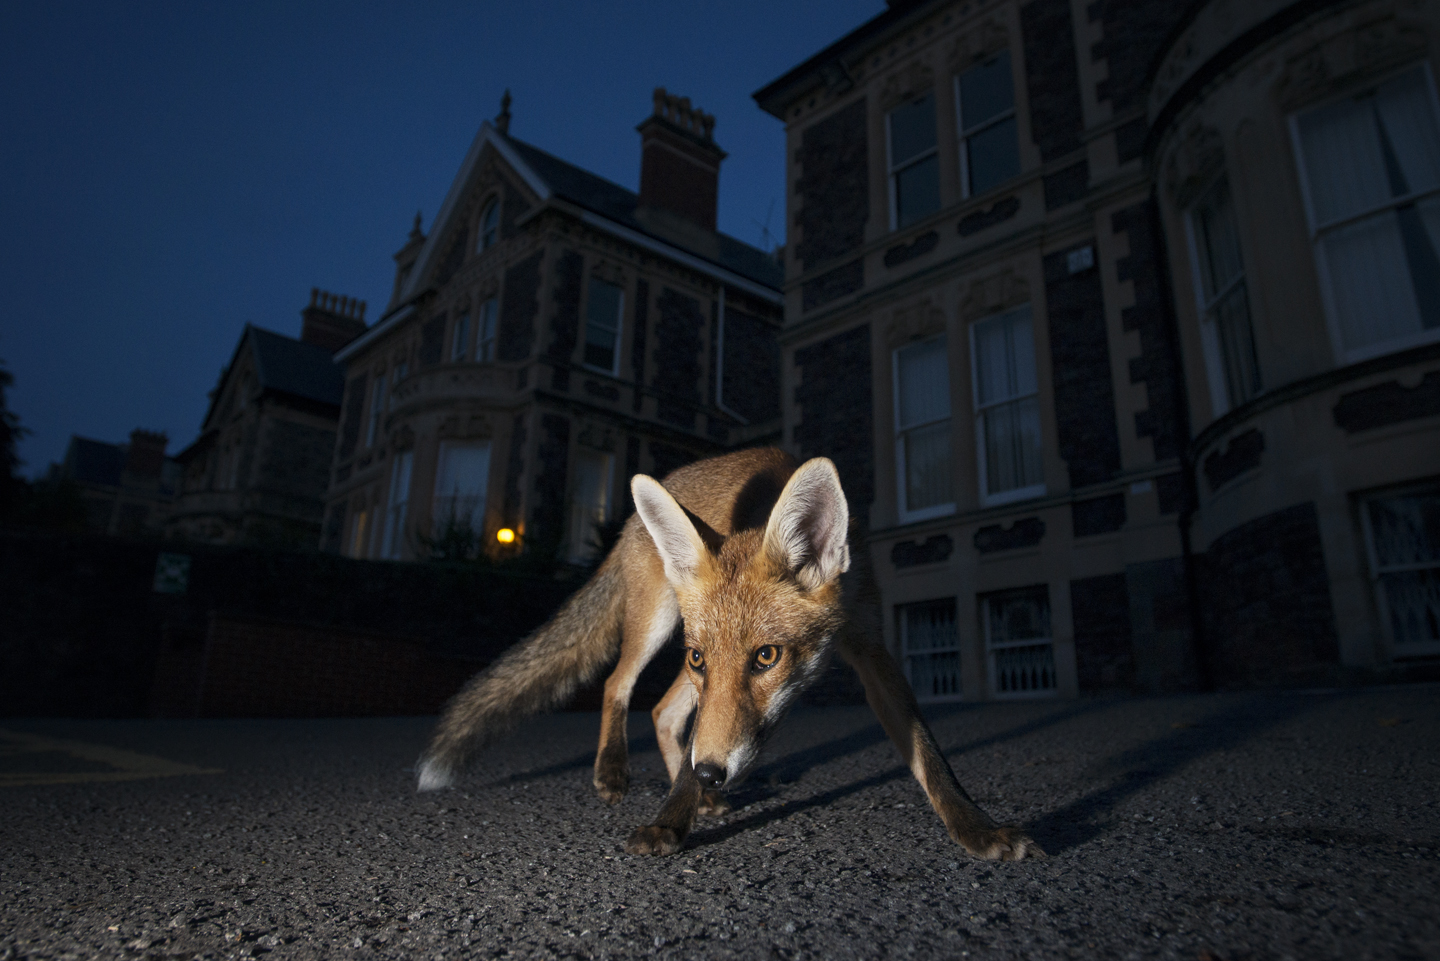   By keeping to the shadows and leading a mostly nocturnal life, the red fox can live alongside man almost unnoticed  